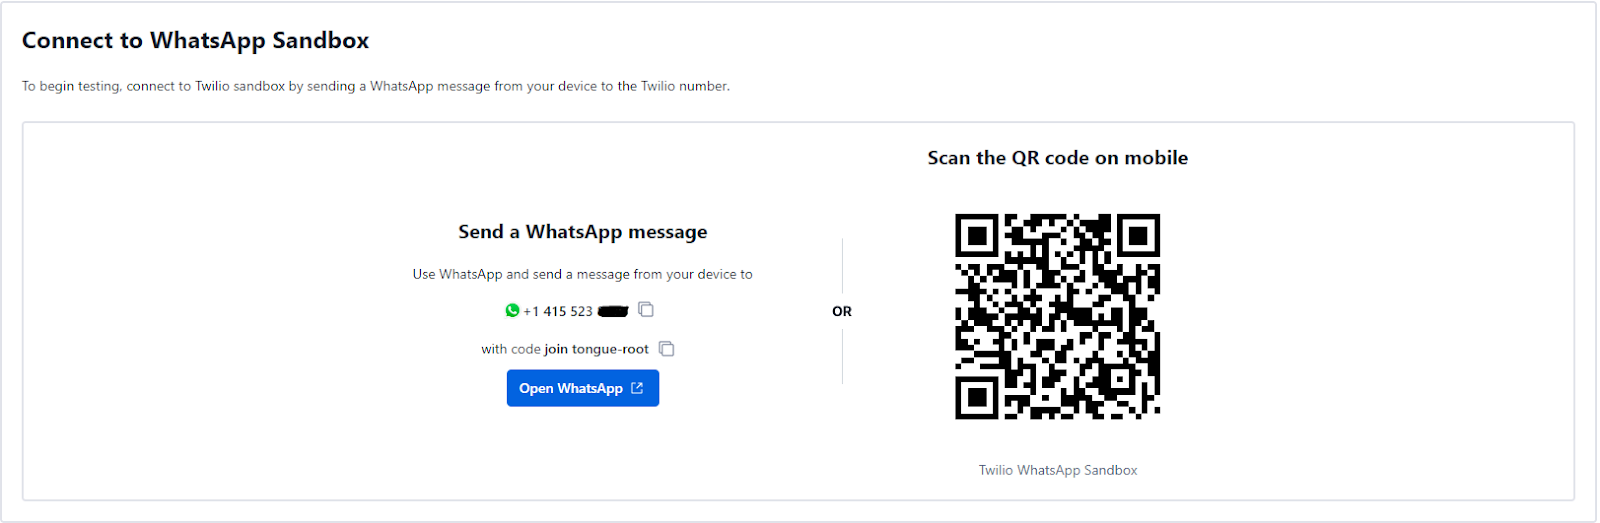 A photo showing how to connect to the Whatsapp sandbox from Twilio console